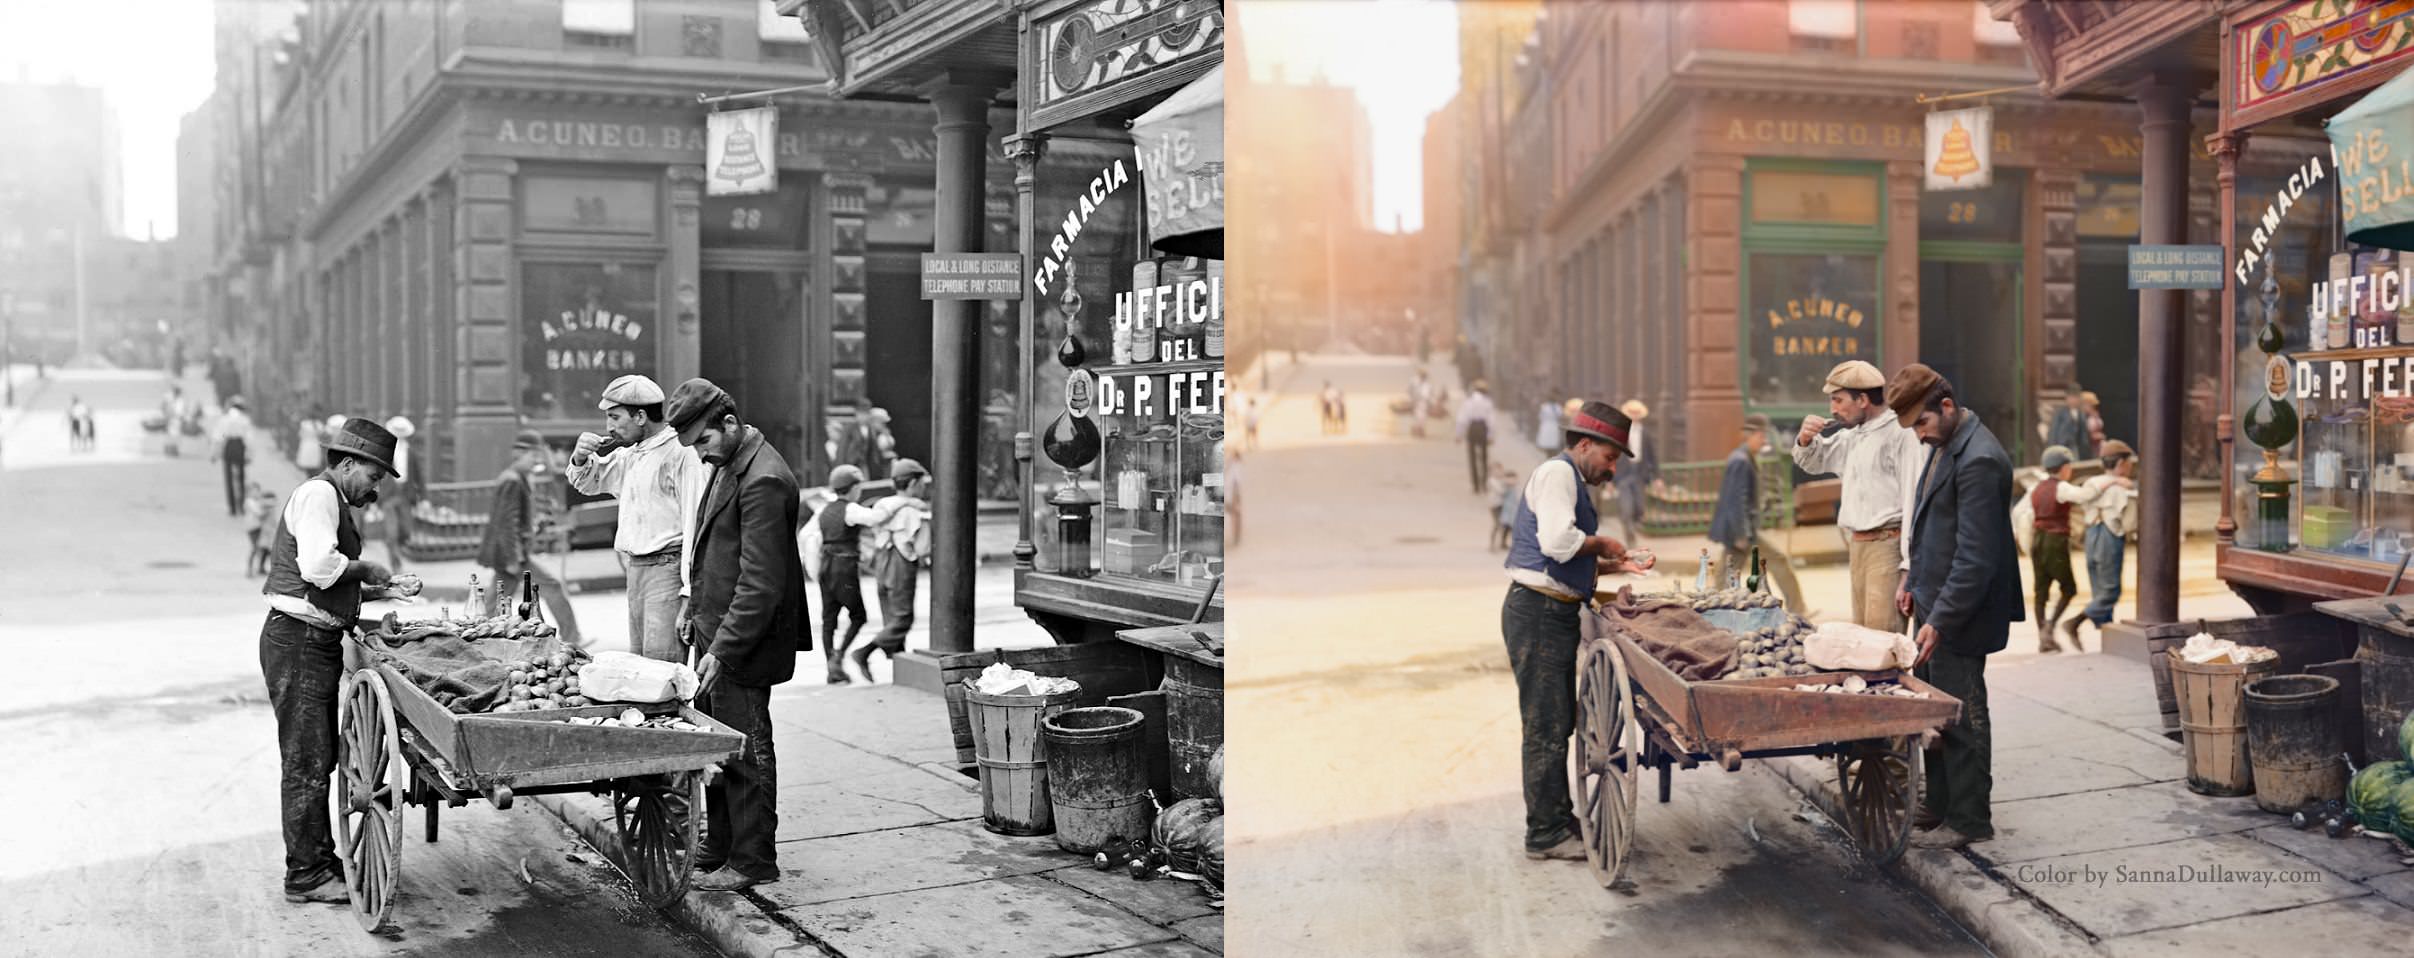 Clam seller in Little Italy in New York City, US in 1905.